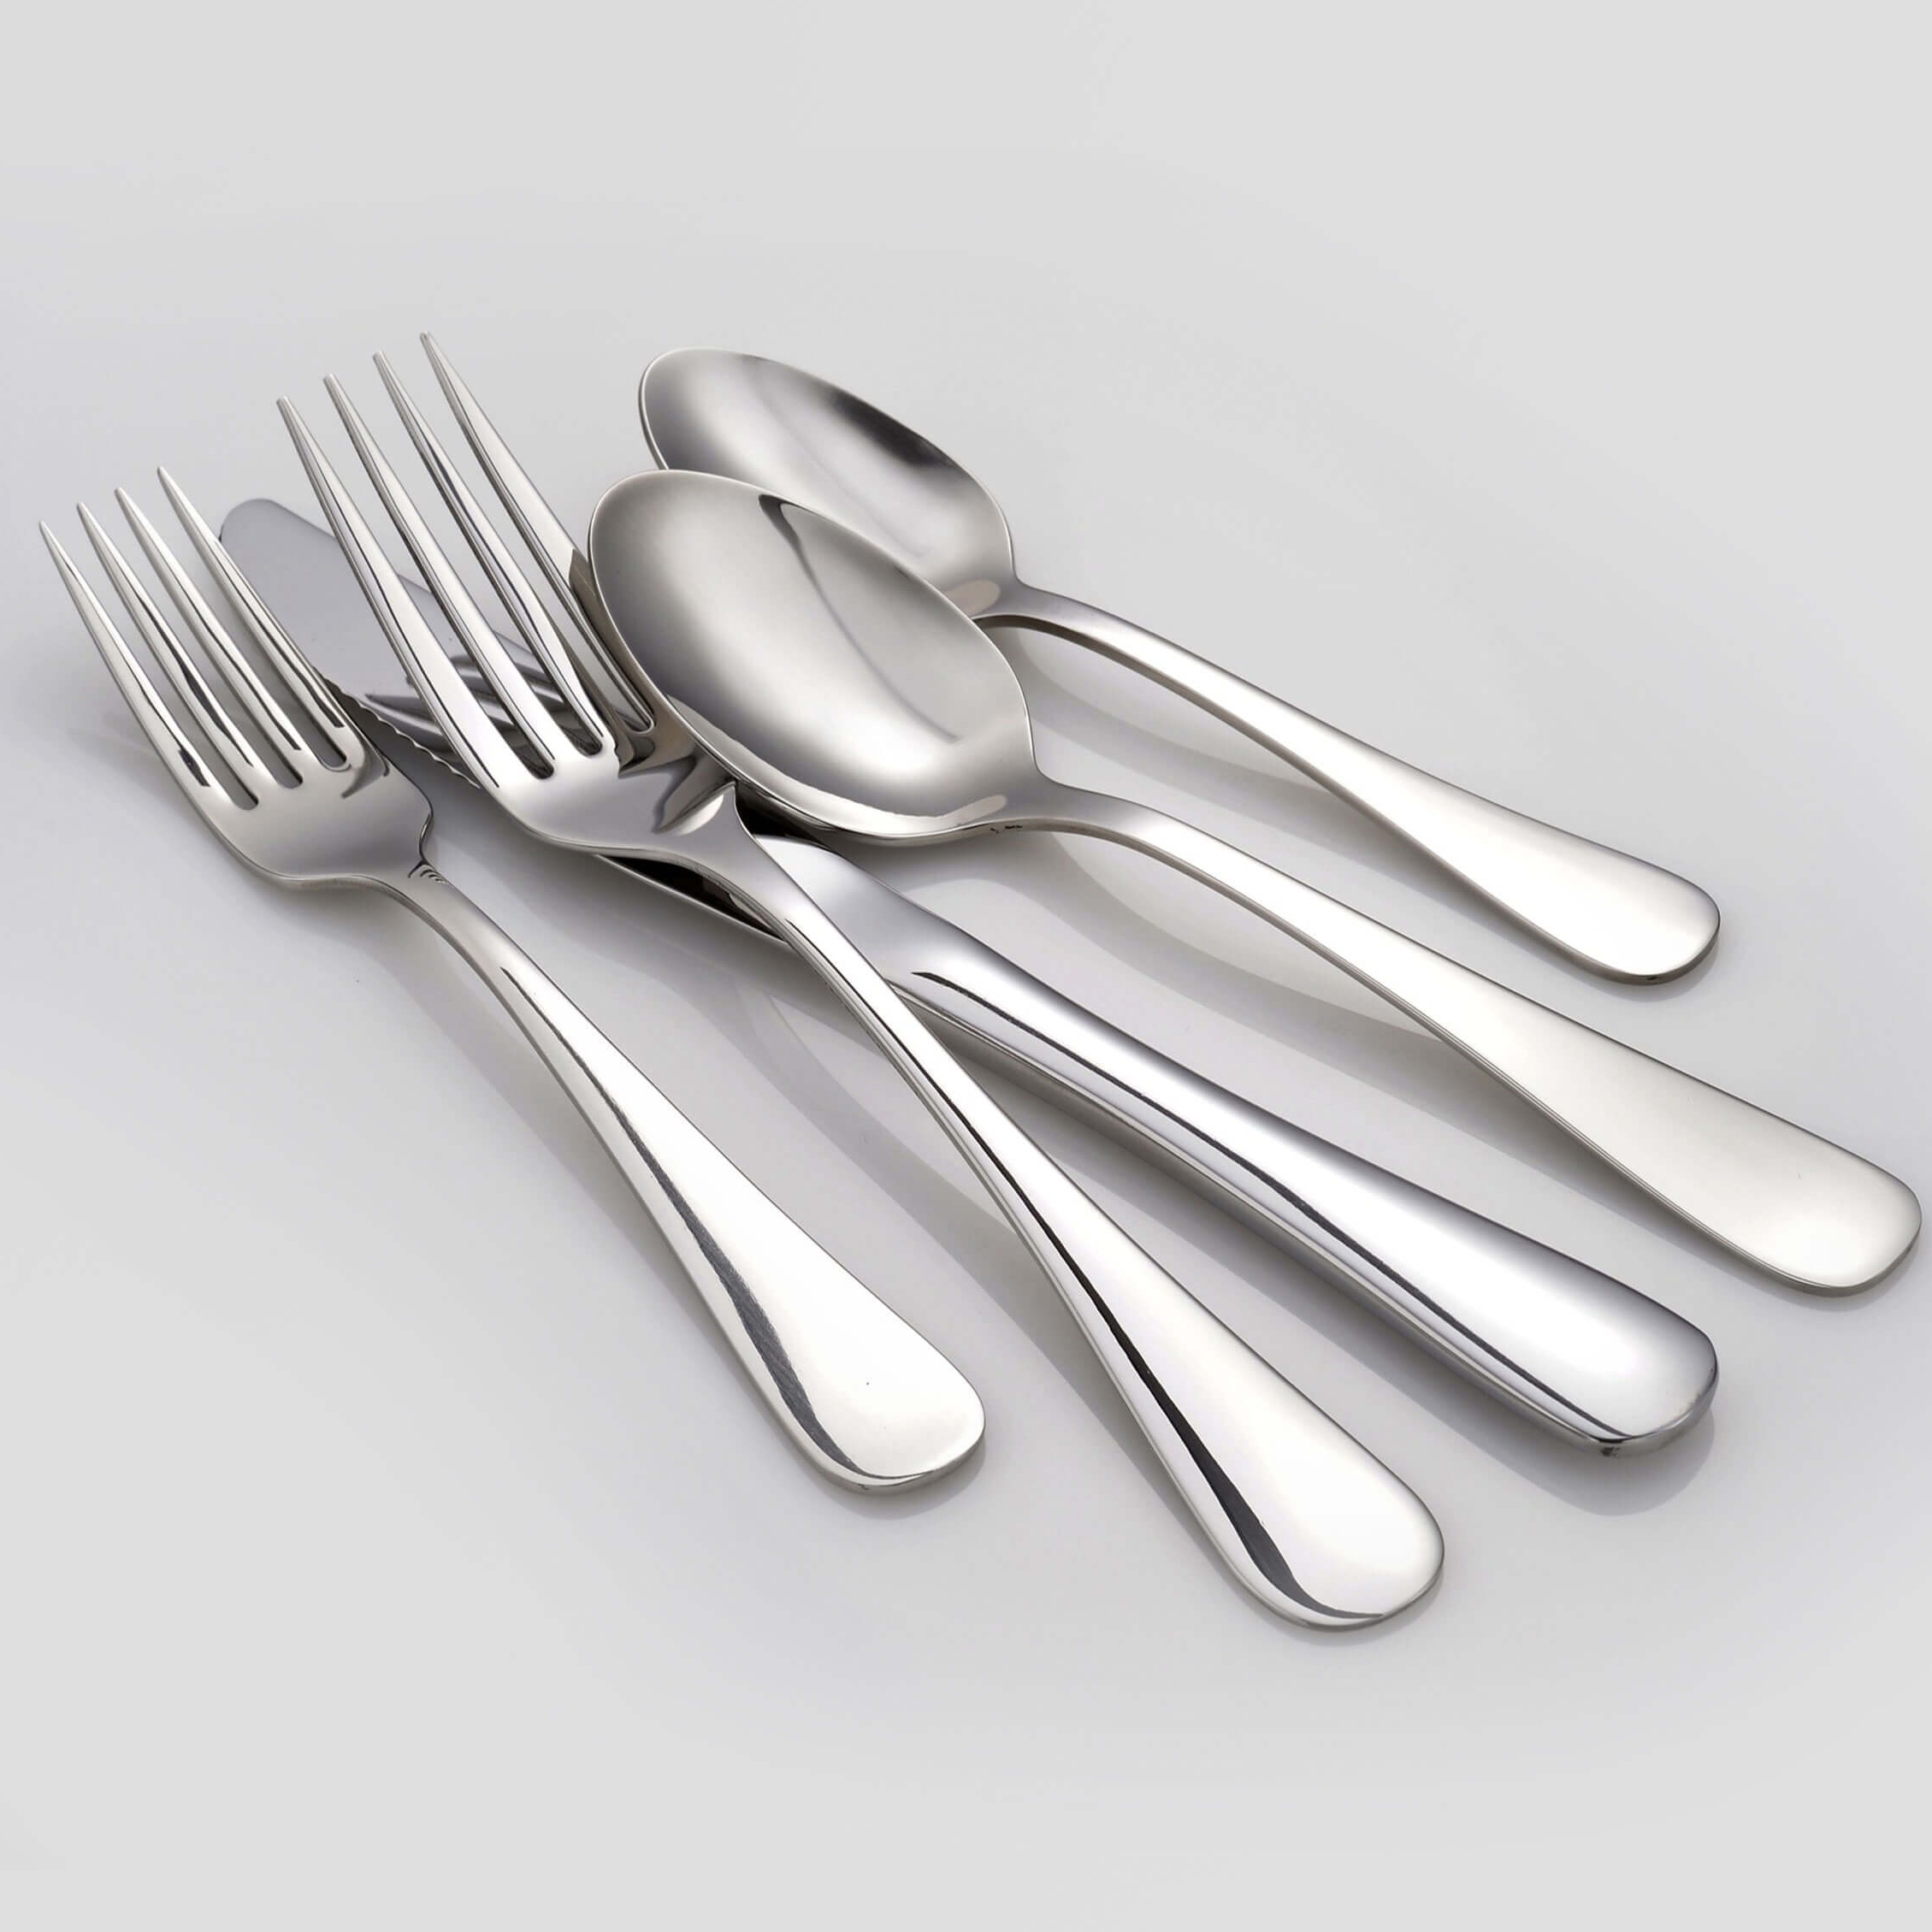 Calavera (Skull) - Liberty Tabletop - The Only Flatware Made in the USA